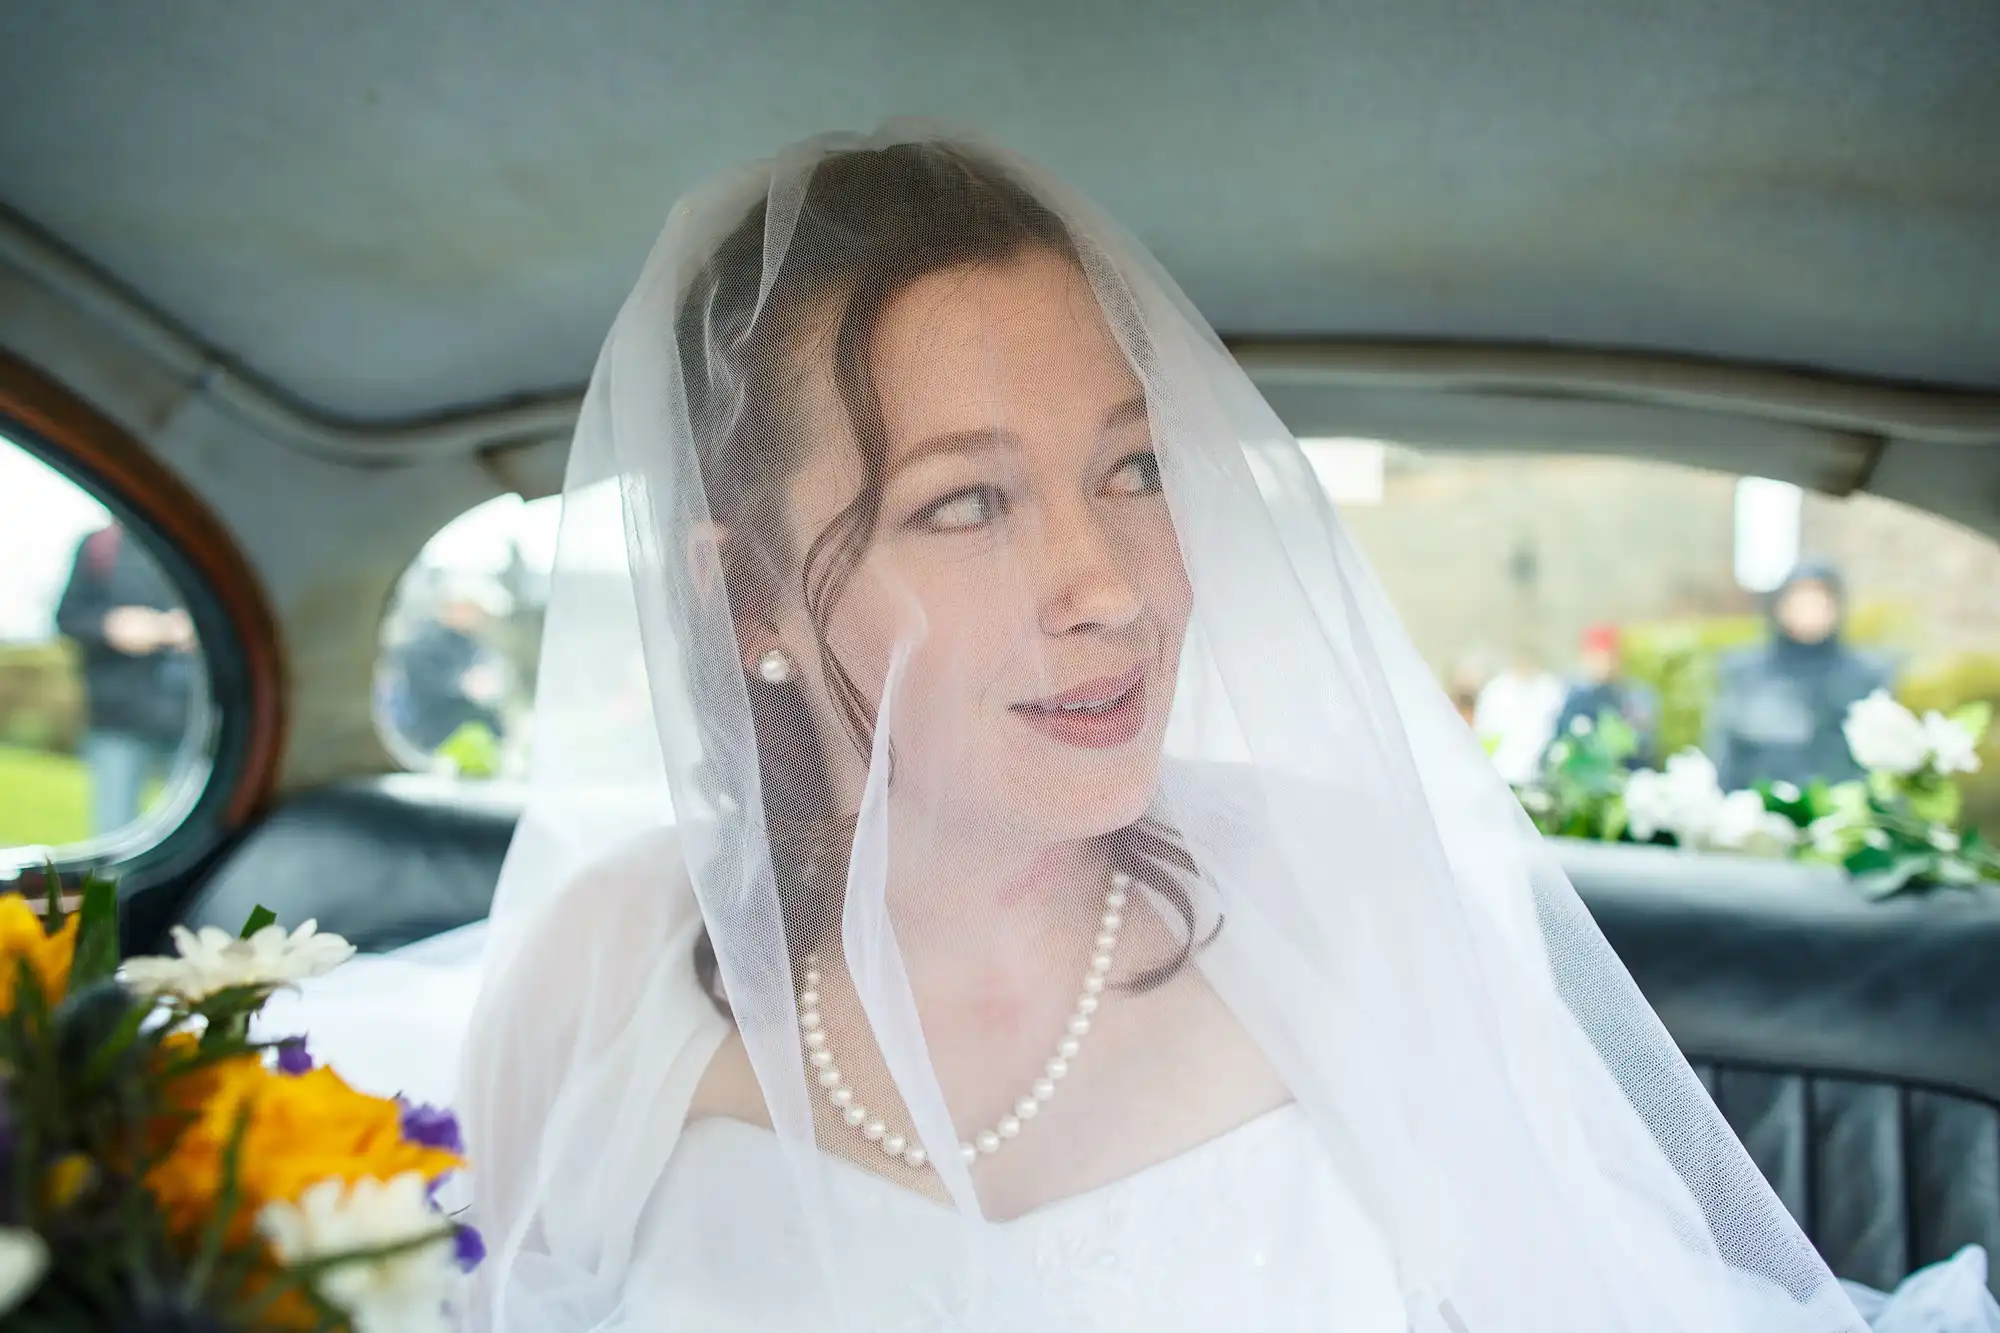 Bride in veil smiling inside a car, with flowers visible through the window.